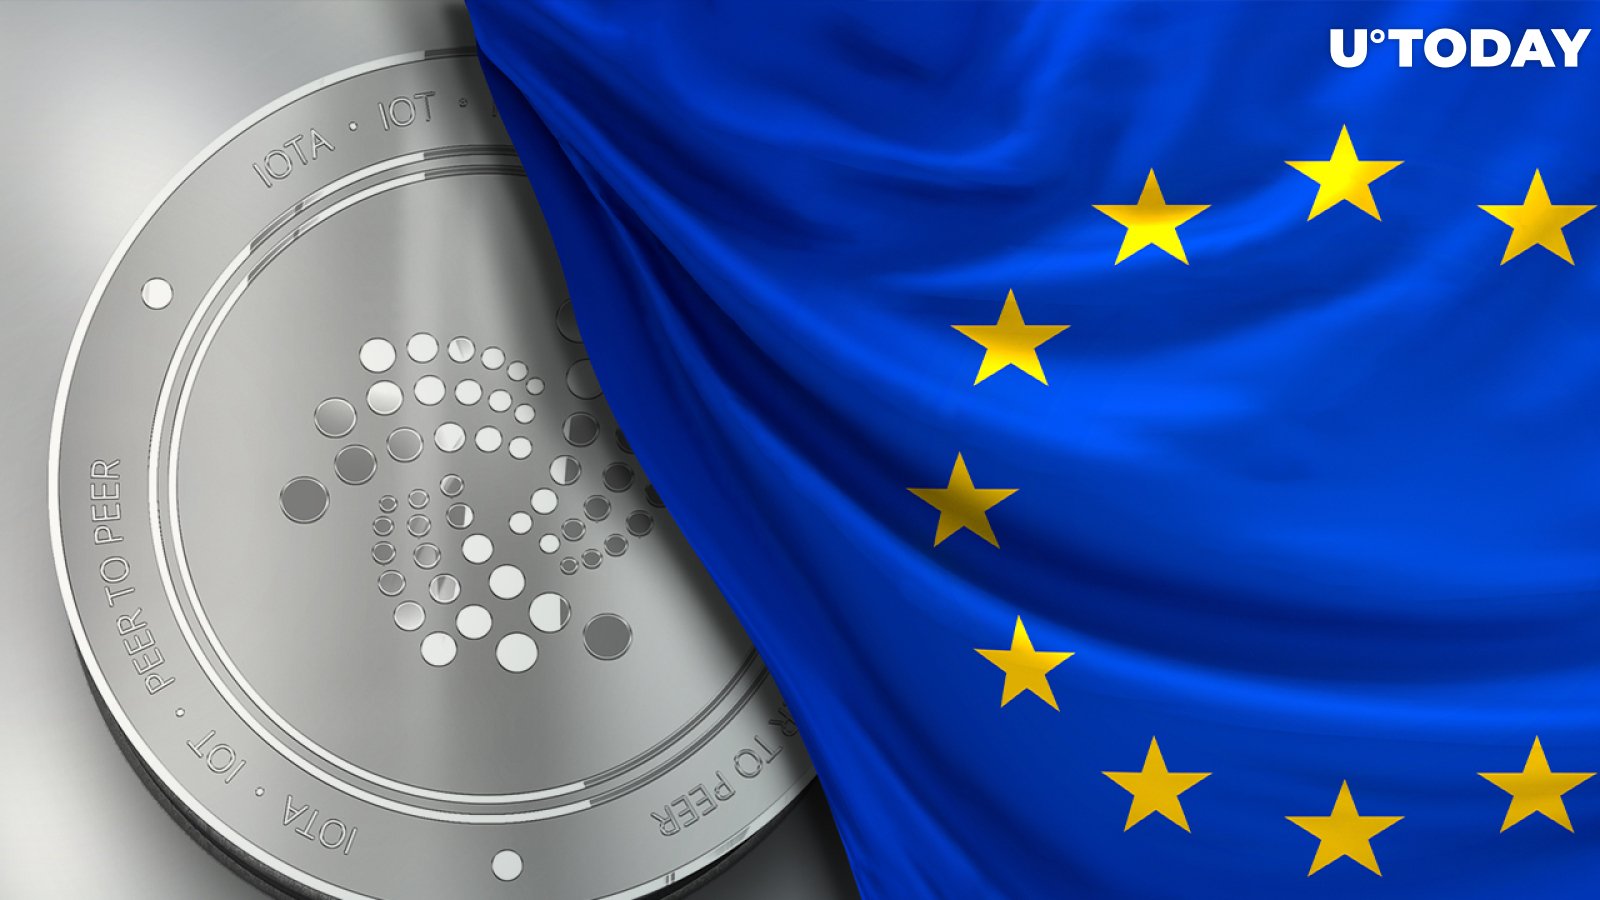 Iota Fears EU Could Stifle Growth of Internet-of-Things Technologies